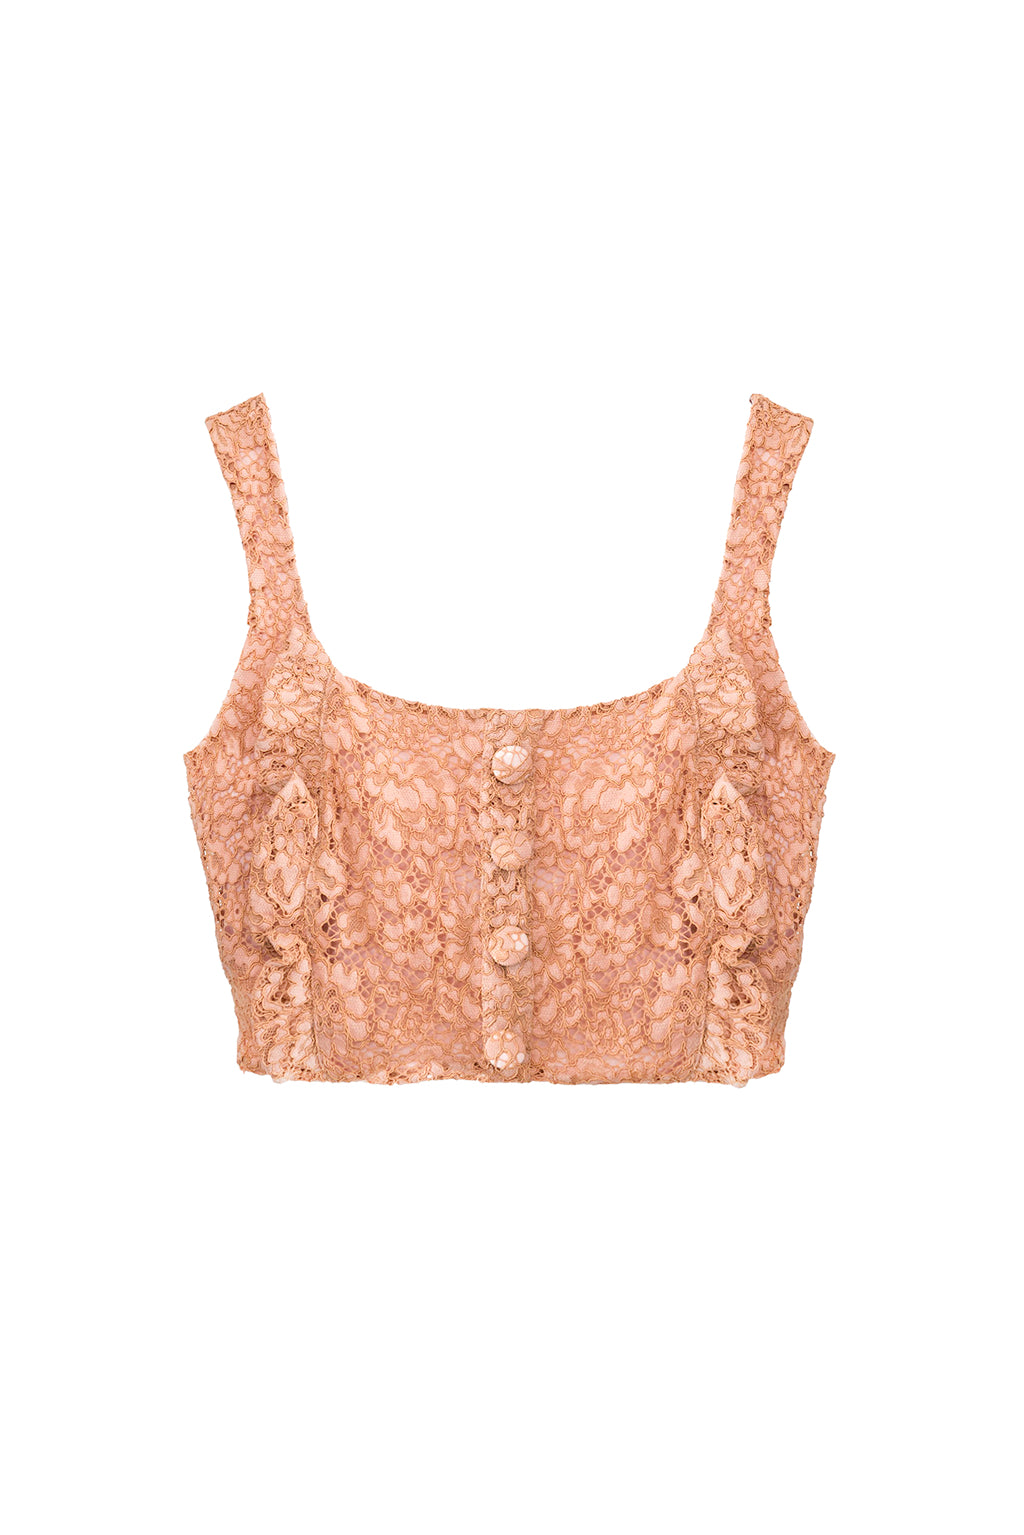 Madison - Lace Top - The Lover's Lover